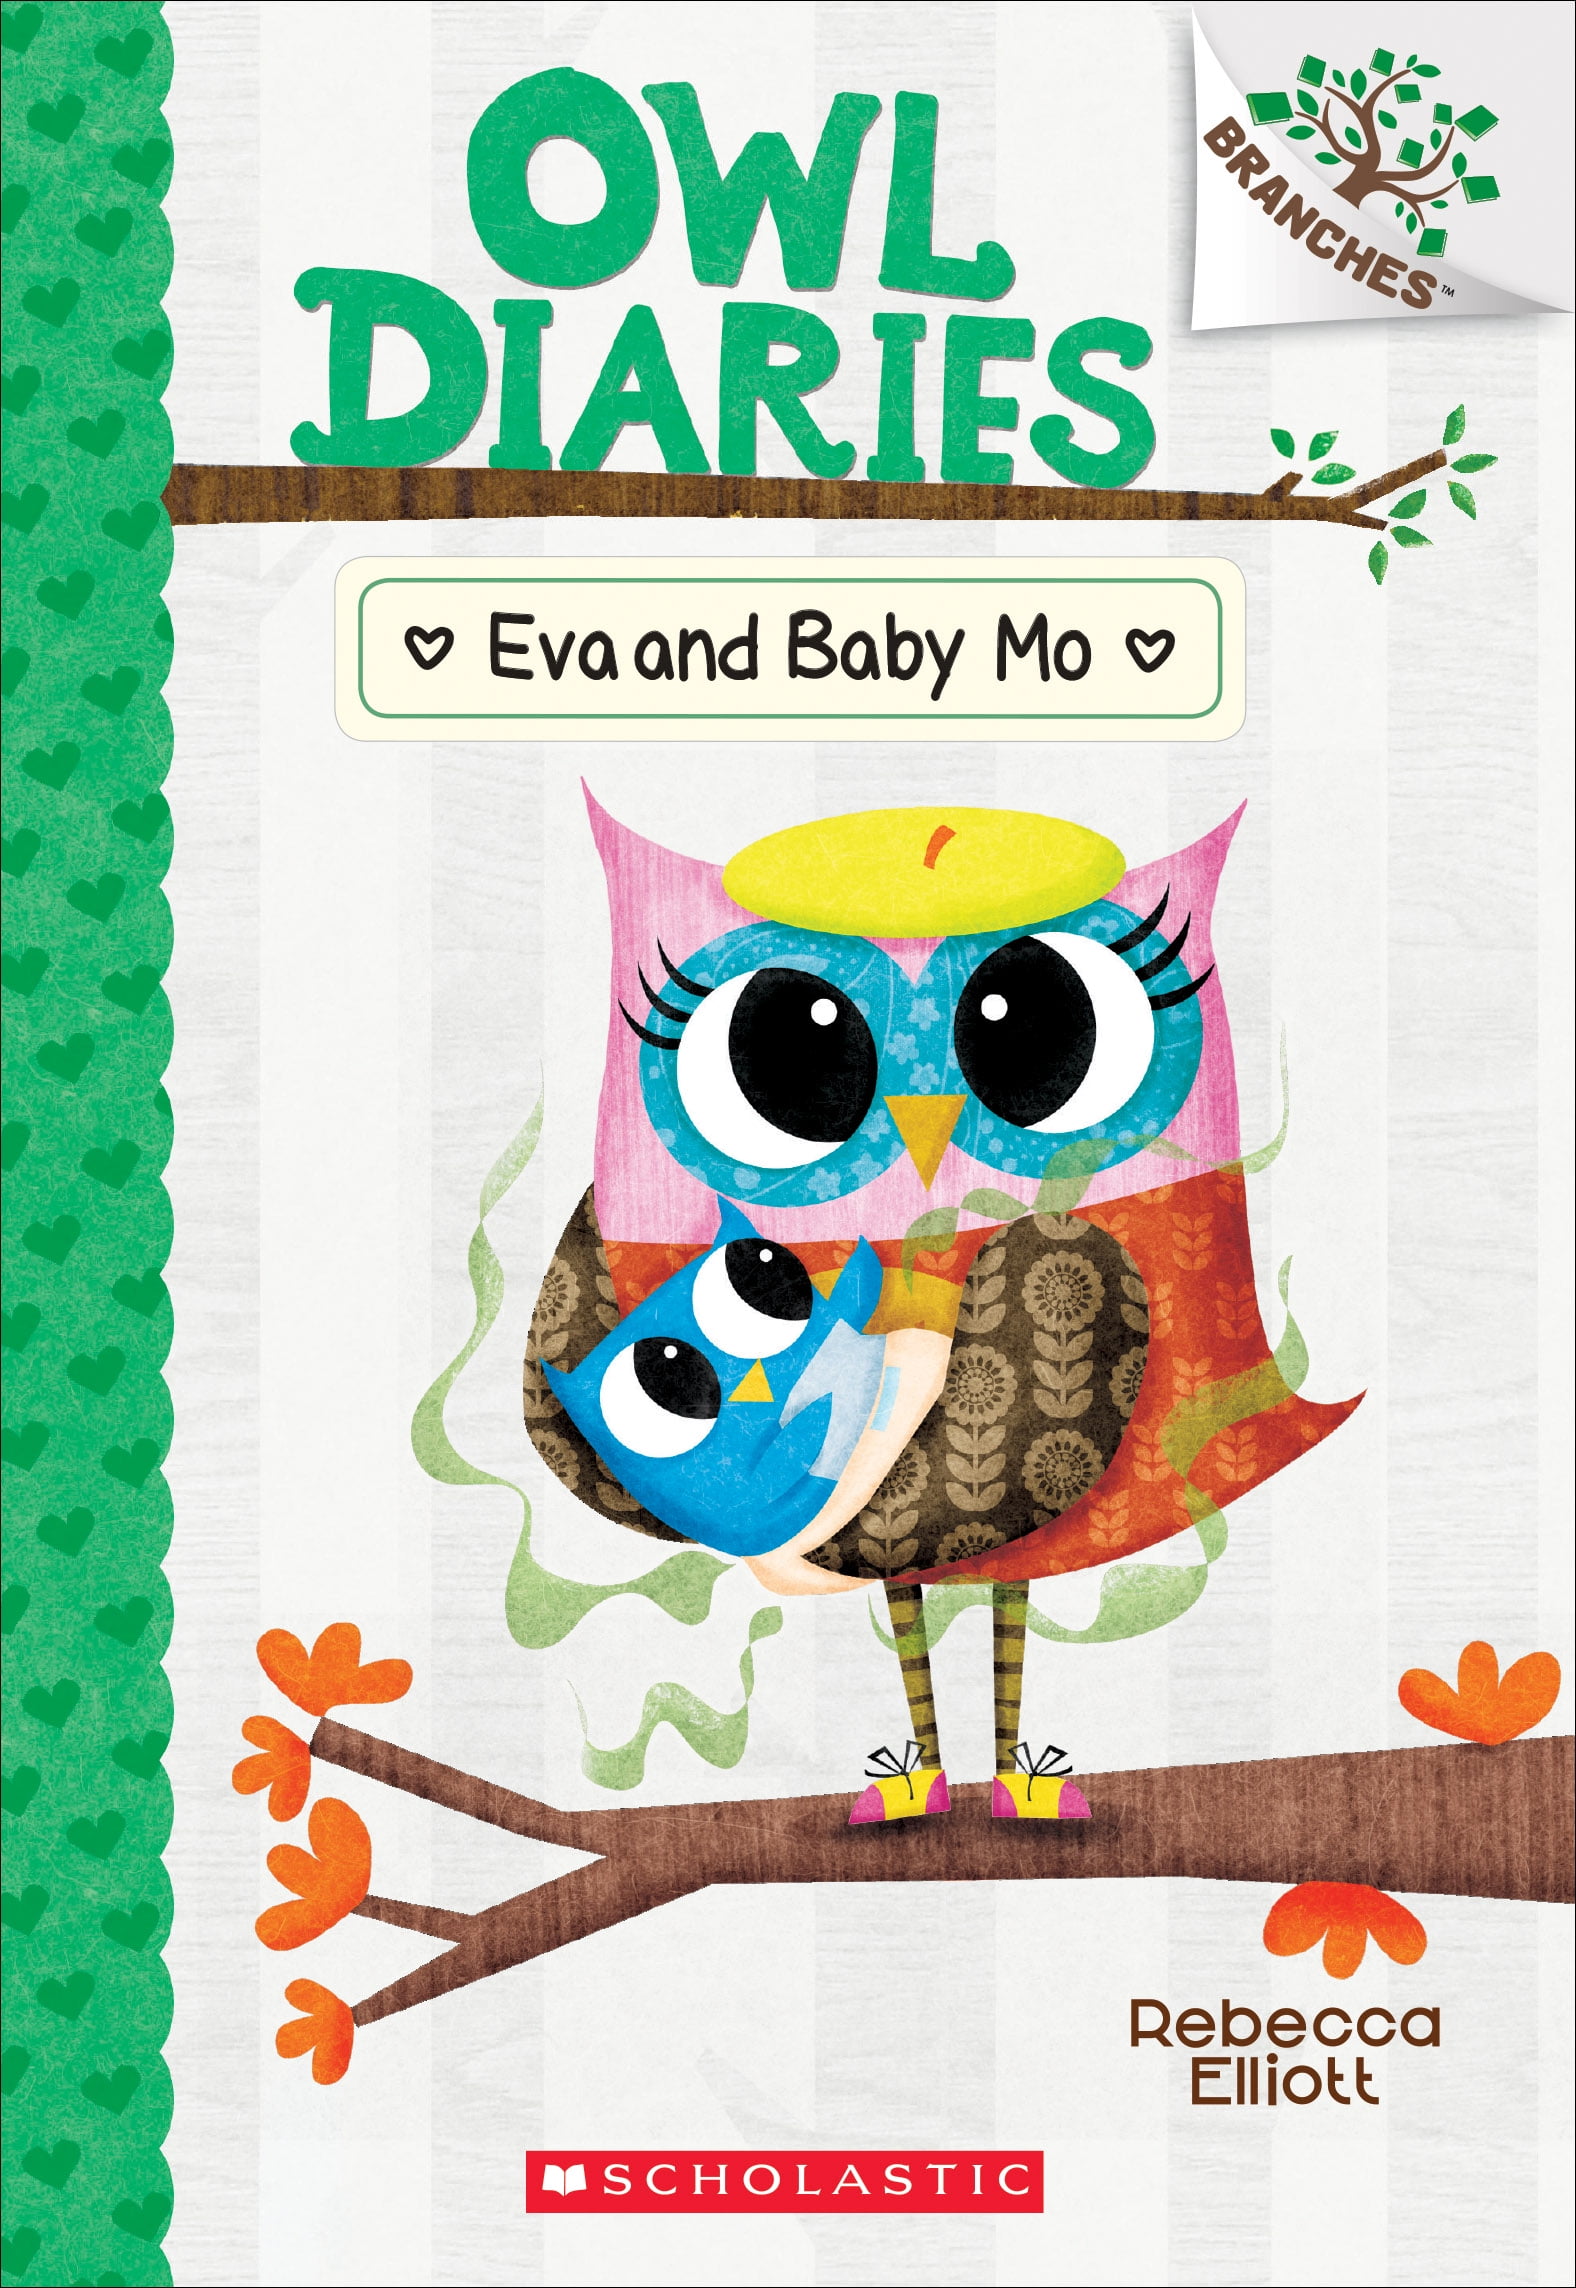 Volume　A　Diaries:　Owl　Baby　Mo:　Eva　Diaries　(Paperback)　and　(Owl　Branches　Book　#10):　10